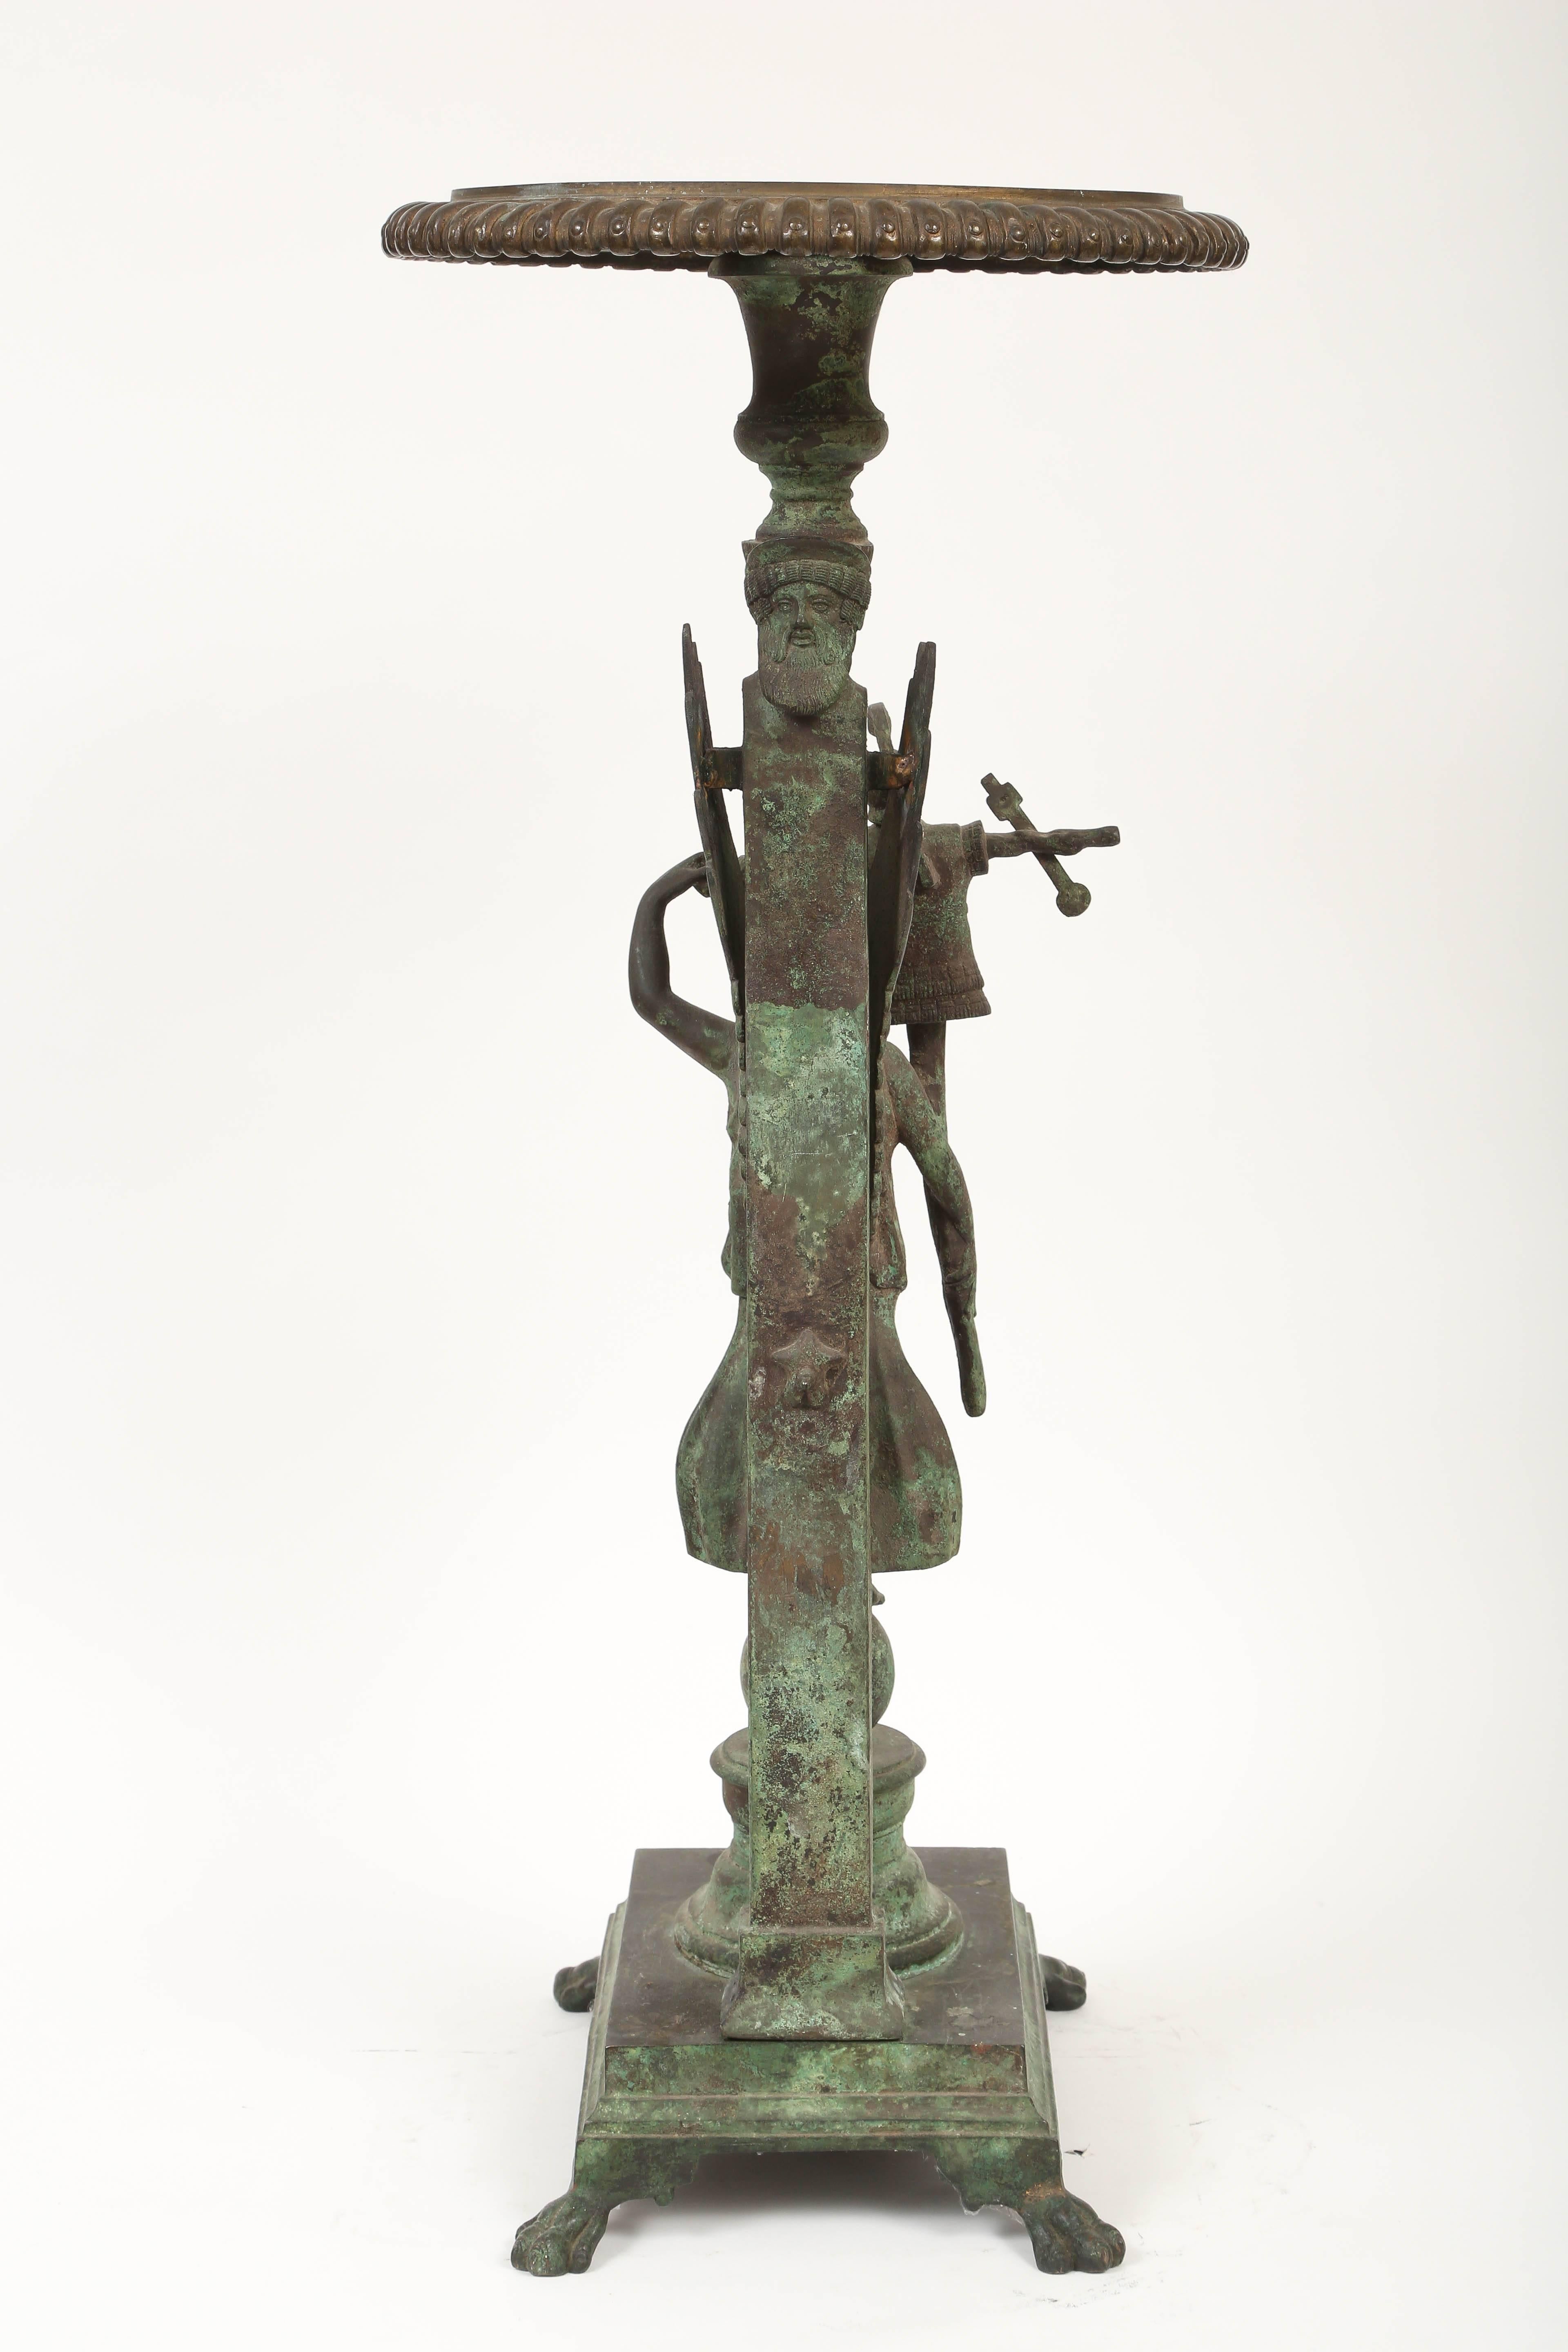 Patinated Pompeii Verdigris Bronze Table with Nike and Trophy, Italian, 19th Century For Sale